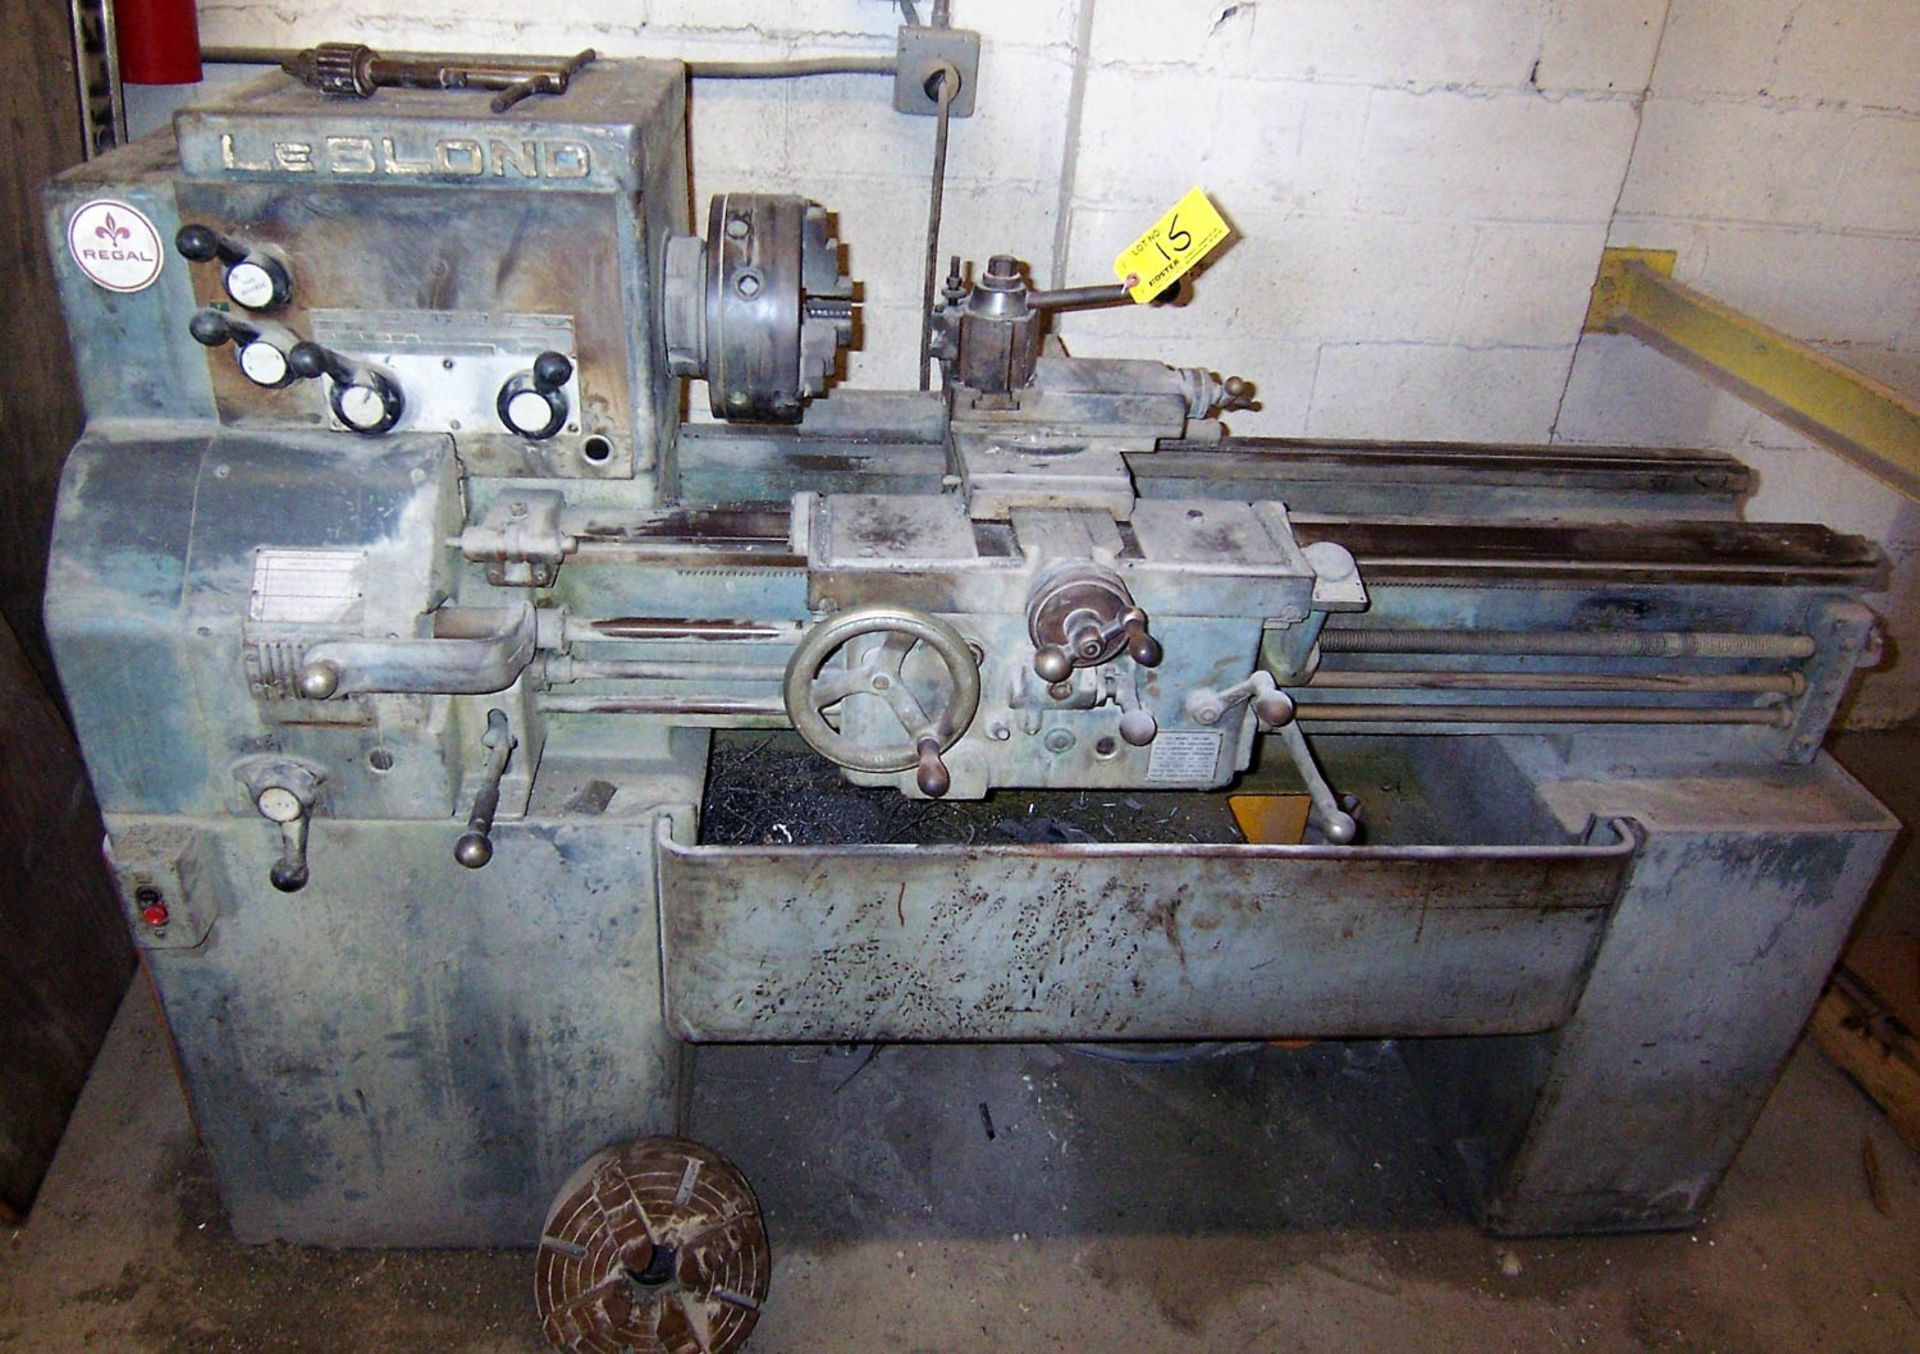 LEBLOND REGAL 15'' X 36'' LATHE, WITH 3 & 4-JAW CHUCKS, QUICK CHANGE TOOL POST, SPINDLE SPEEDS 60-